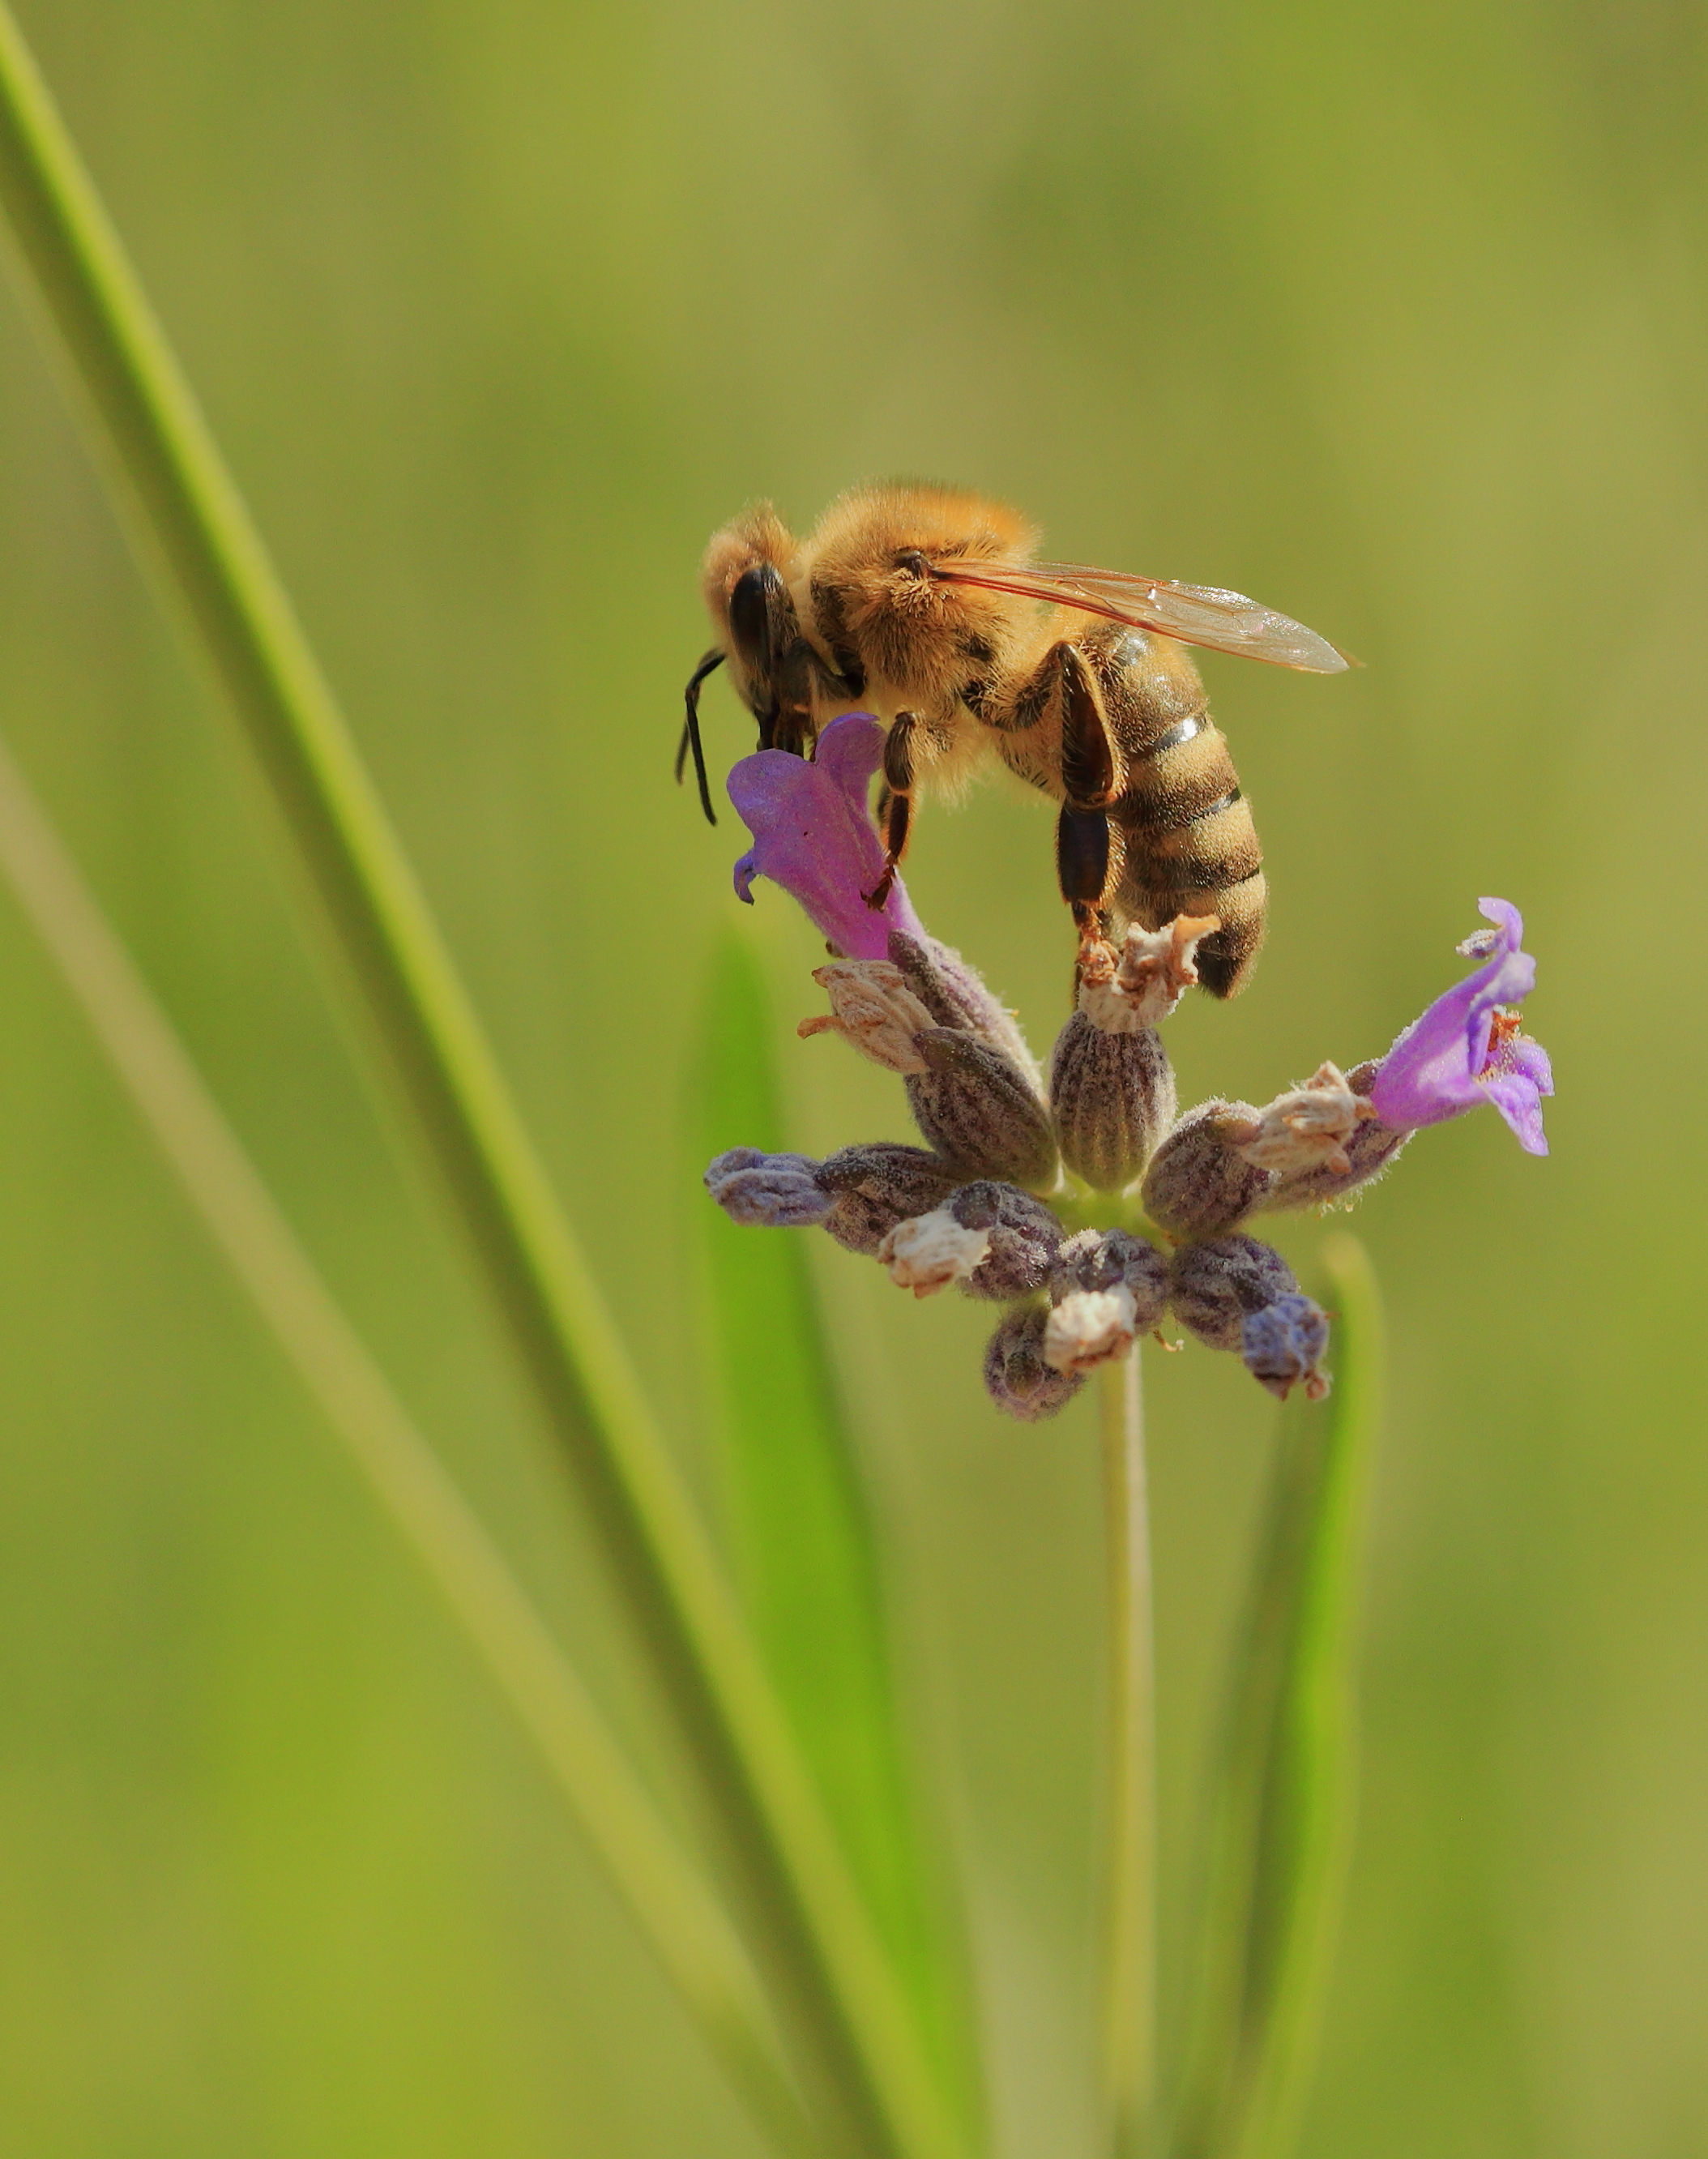 File:Bee on Lavender Blossom 2.jpg - Wikimedia Commons